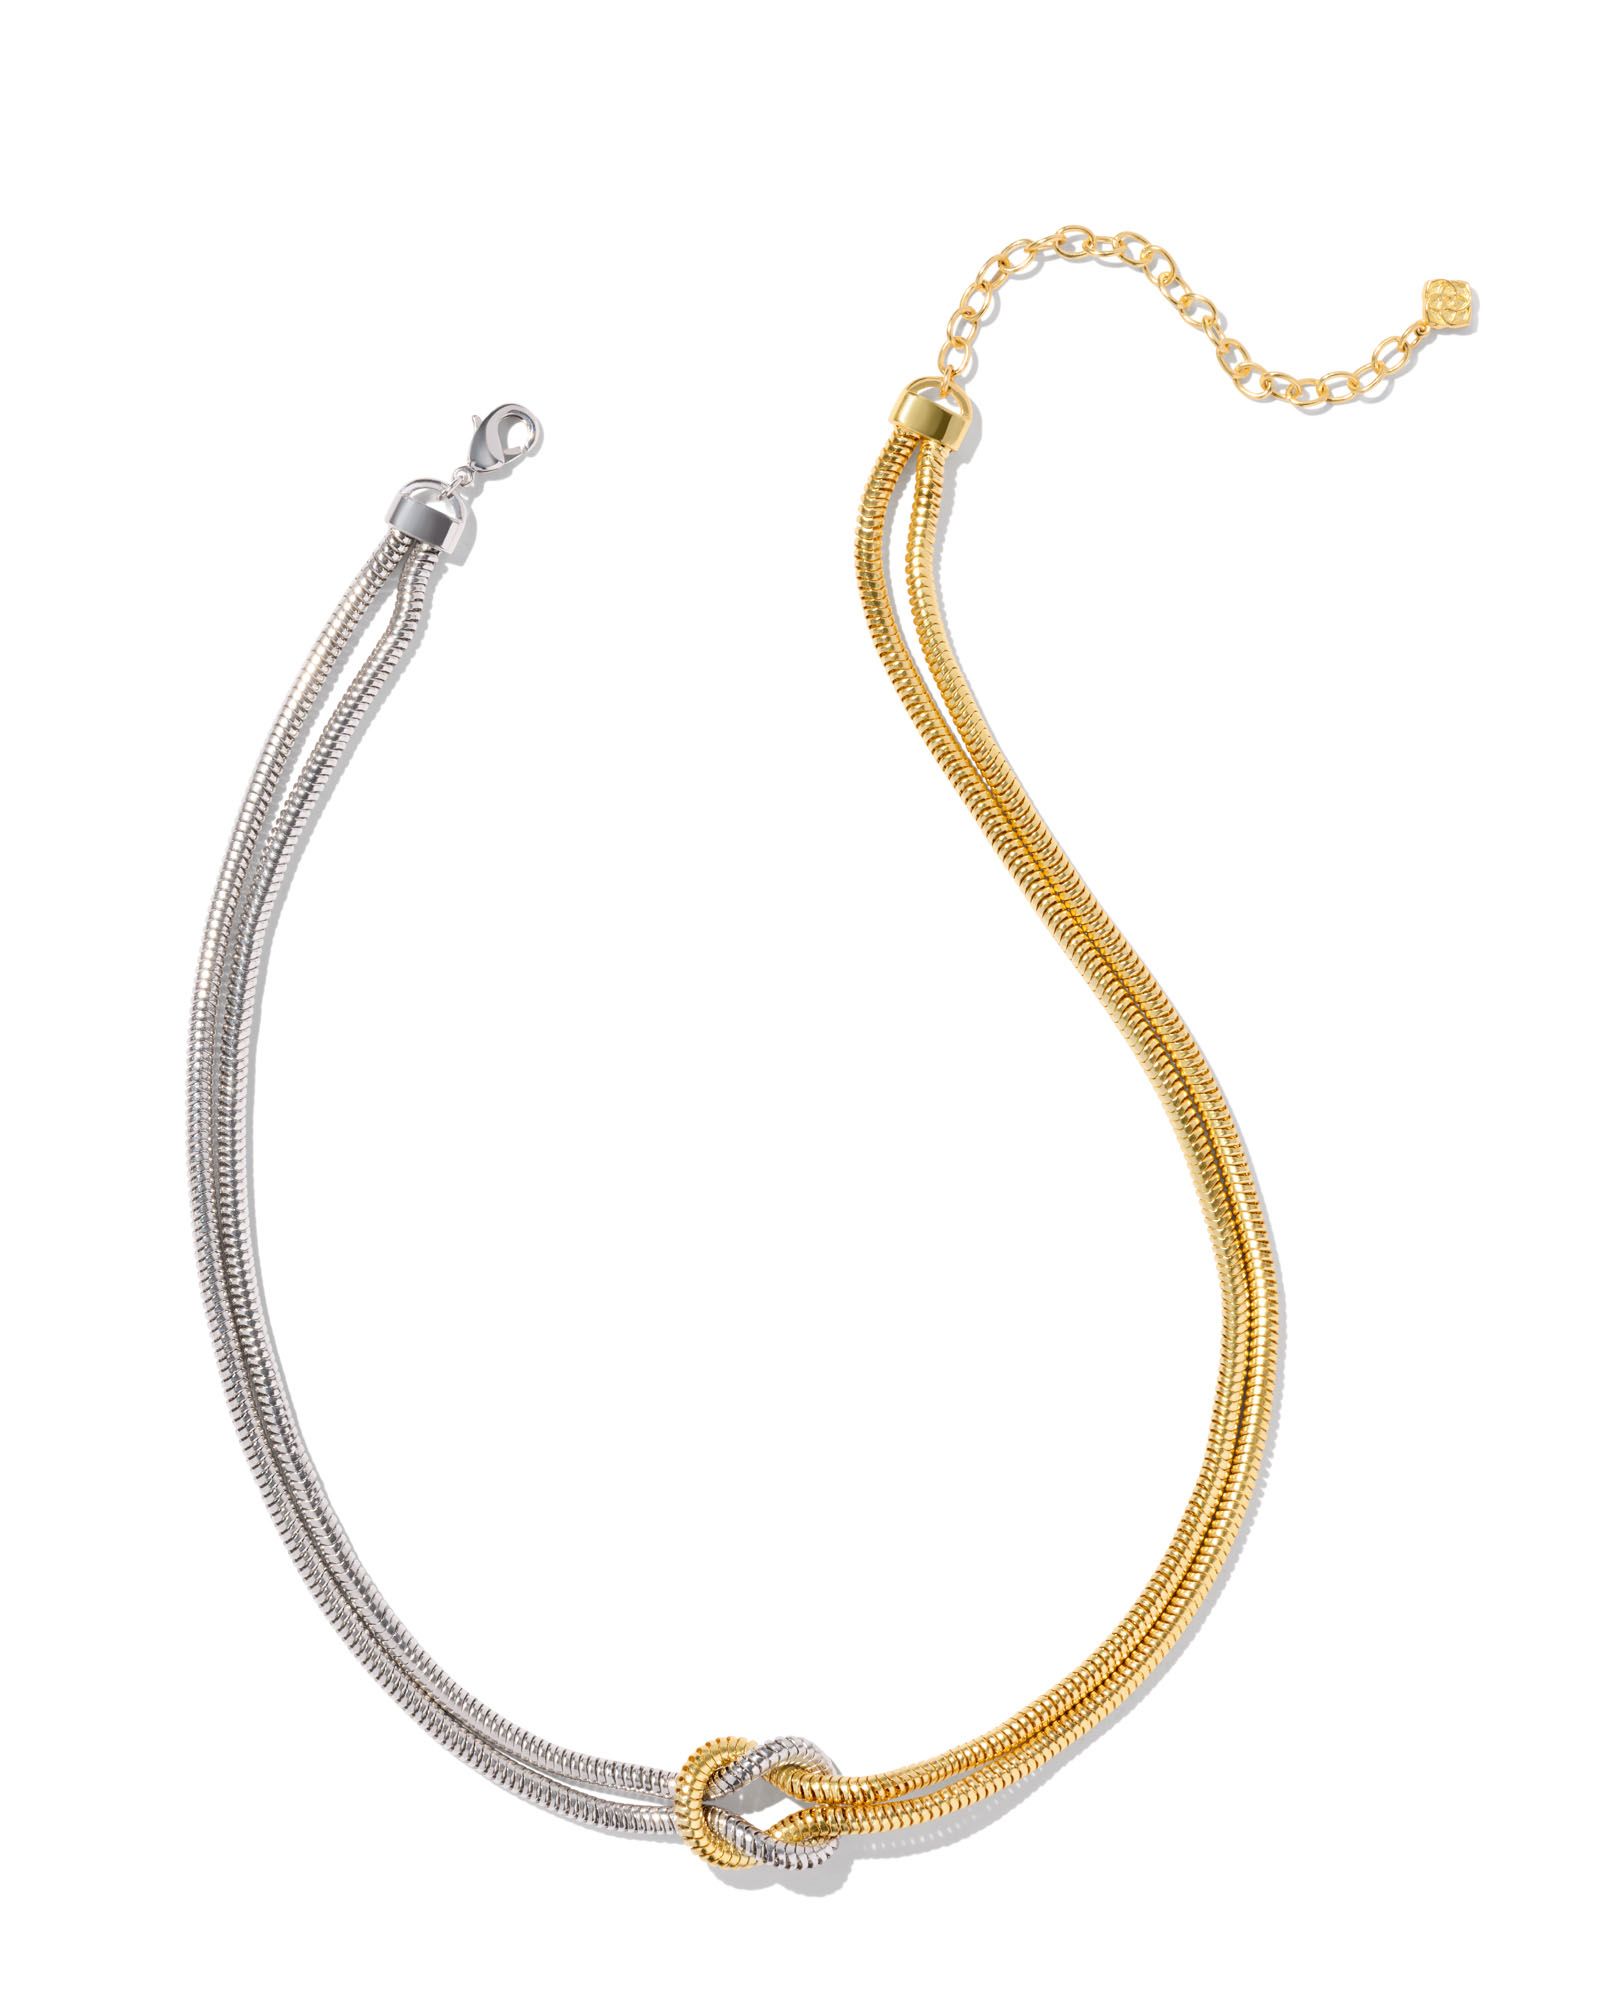 Annie Chain Necklace in Mixed Metal | Kendra Scott